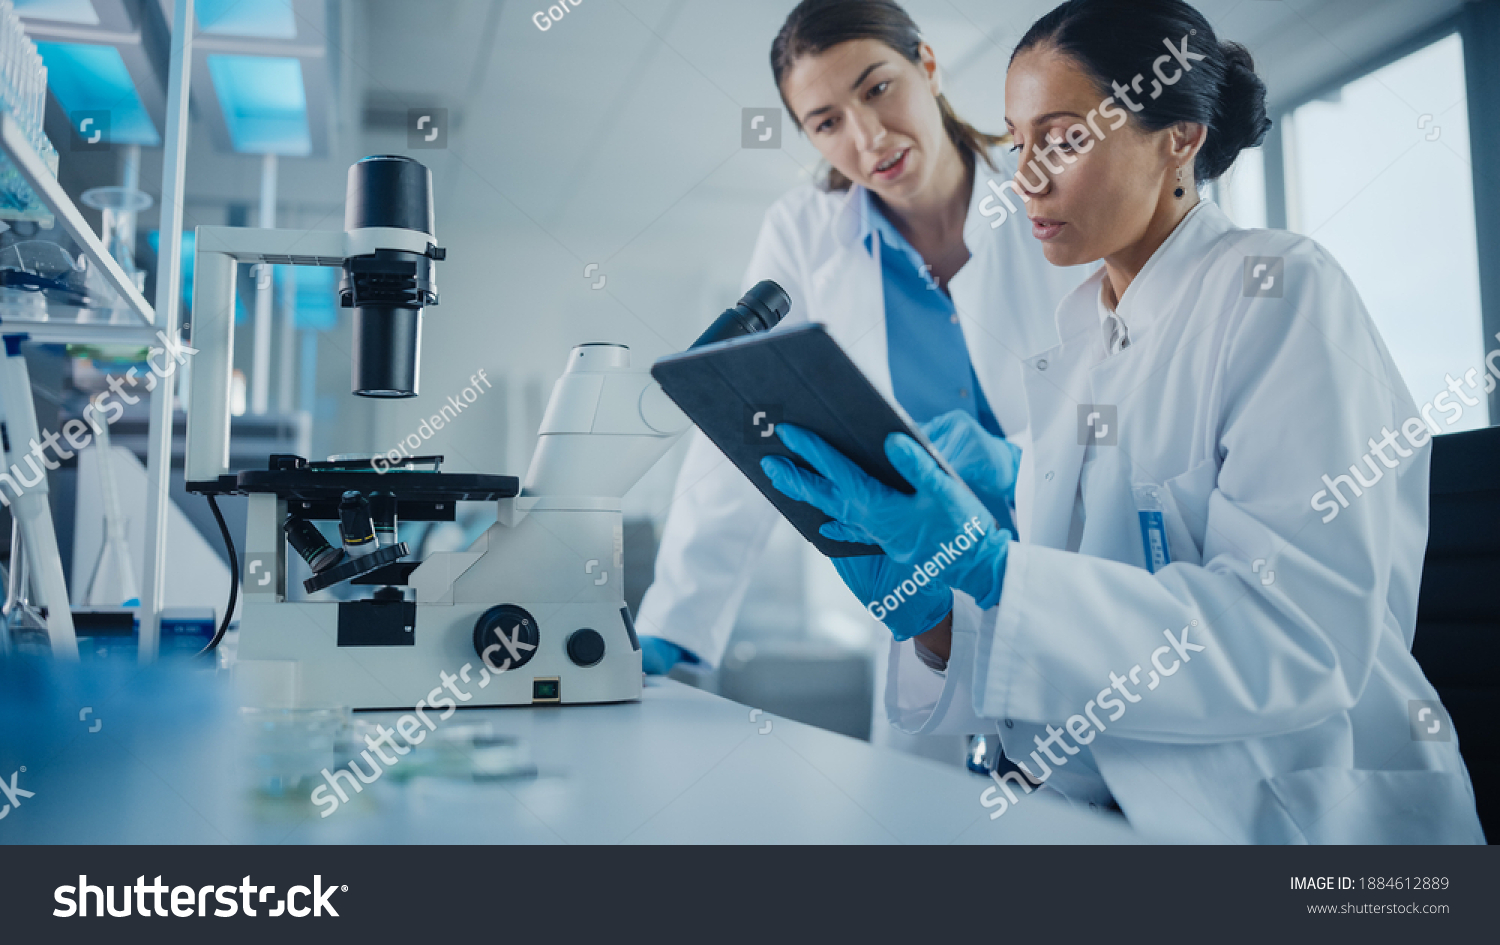 Modern Medical Research Laboratory: Two Female Scientists Working, Using Digital Tablet, Analysing Samples, Talking. Advanced Scientific Pharmaceutical Lab for Medicine, Biotechnology Development #1884612889